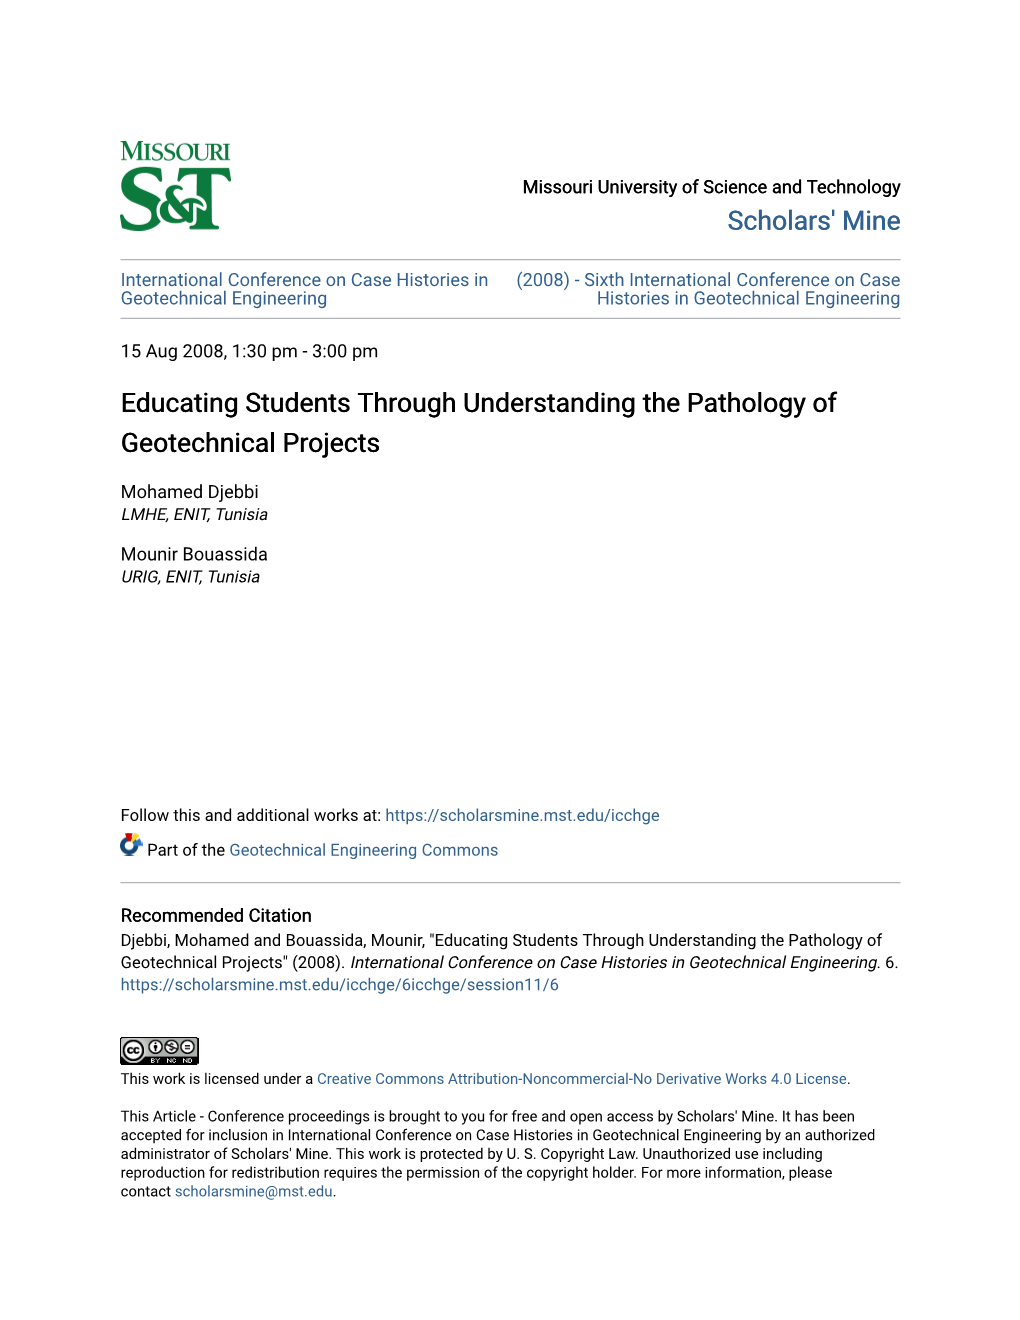 Educating Students Through Understanding the Pathology of Geotechnical Projects